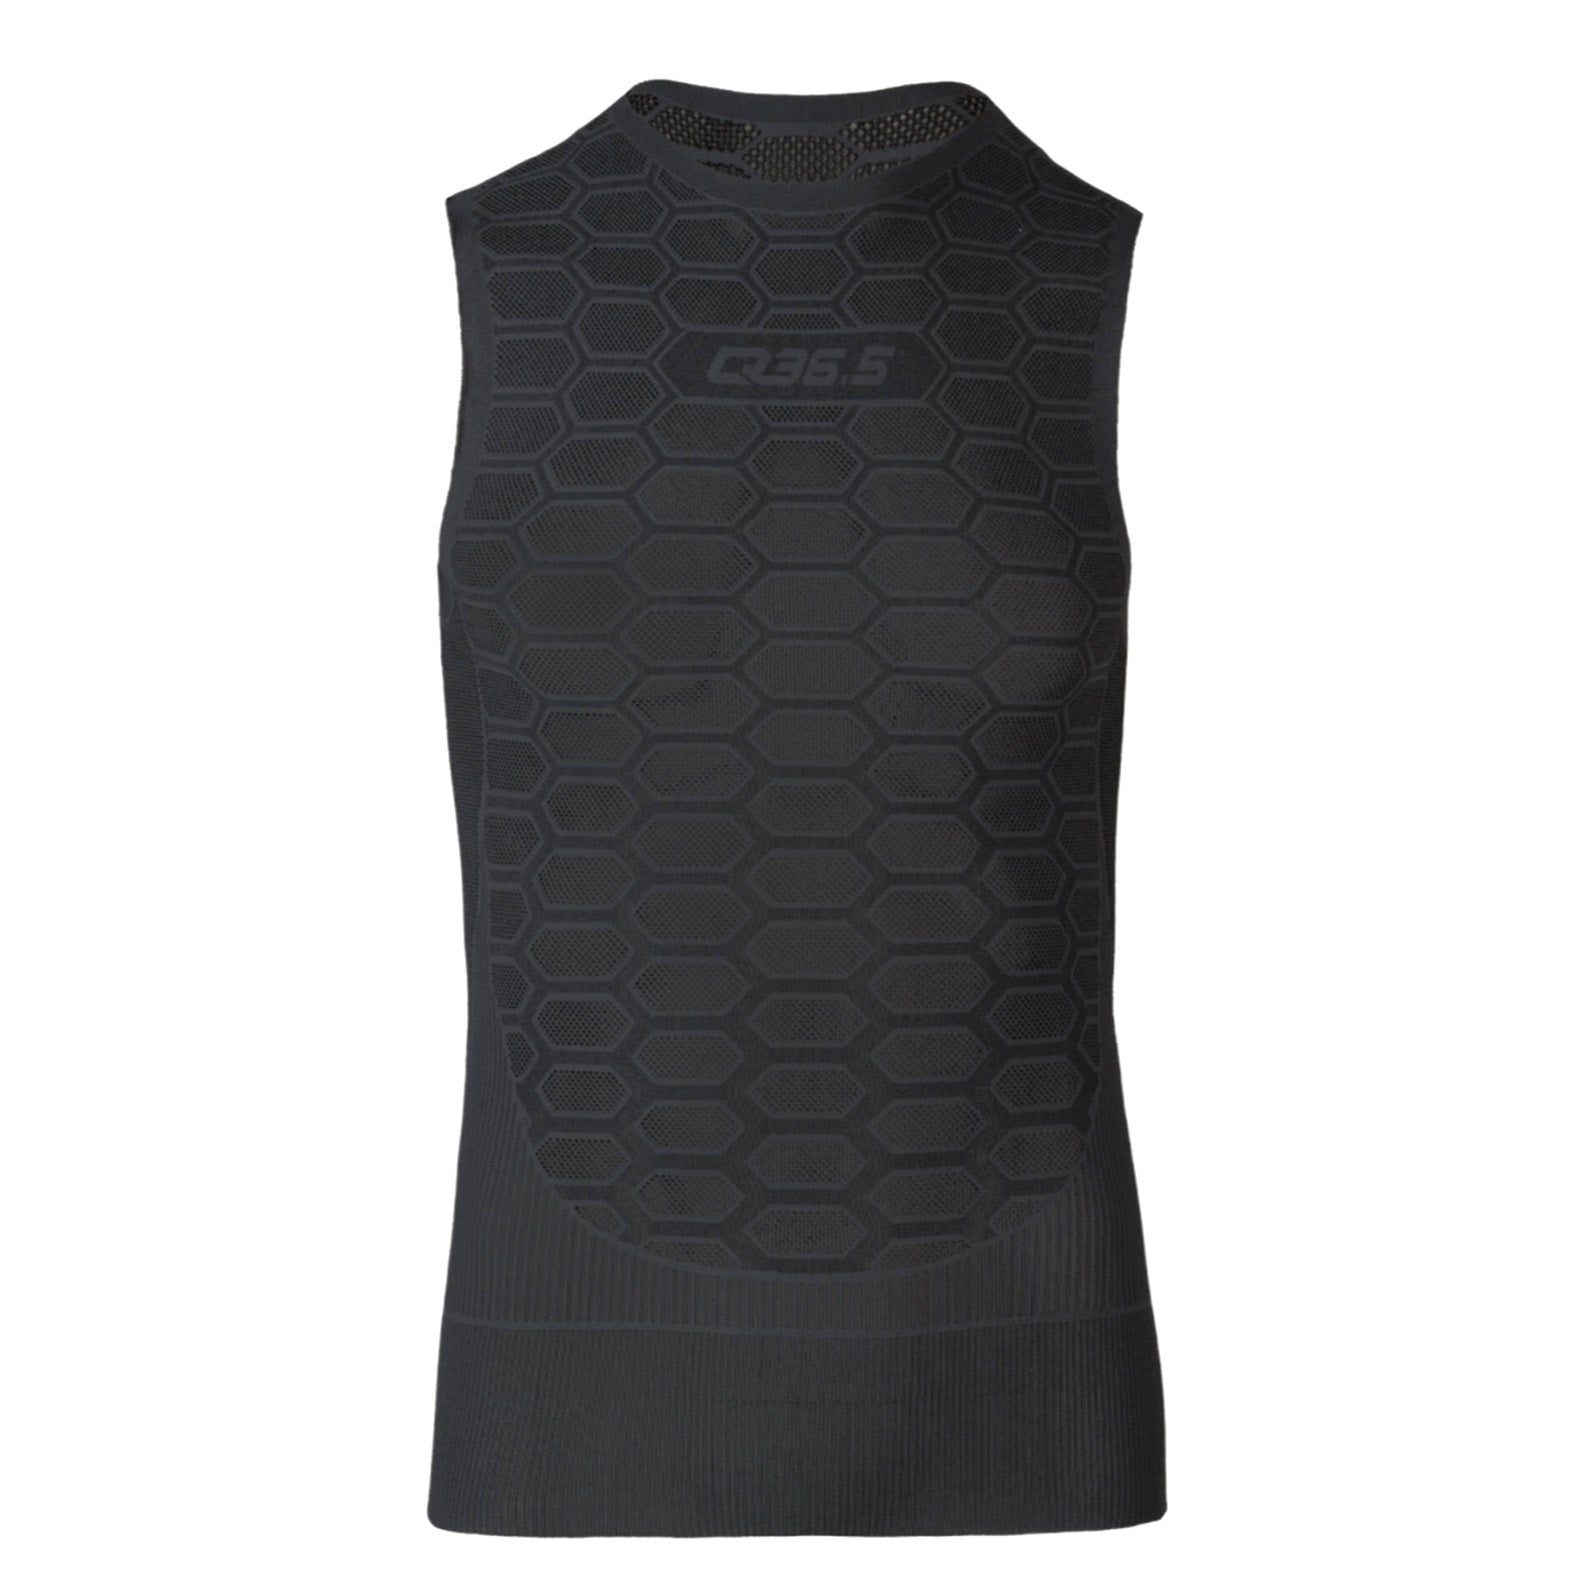 Q36.5 Mens Base Layer 1 Sleeveless in Anthracite